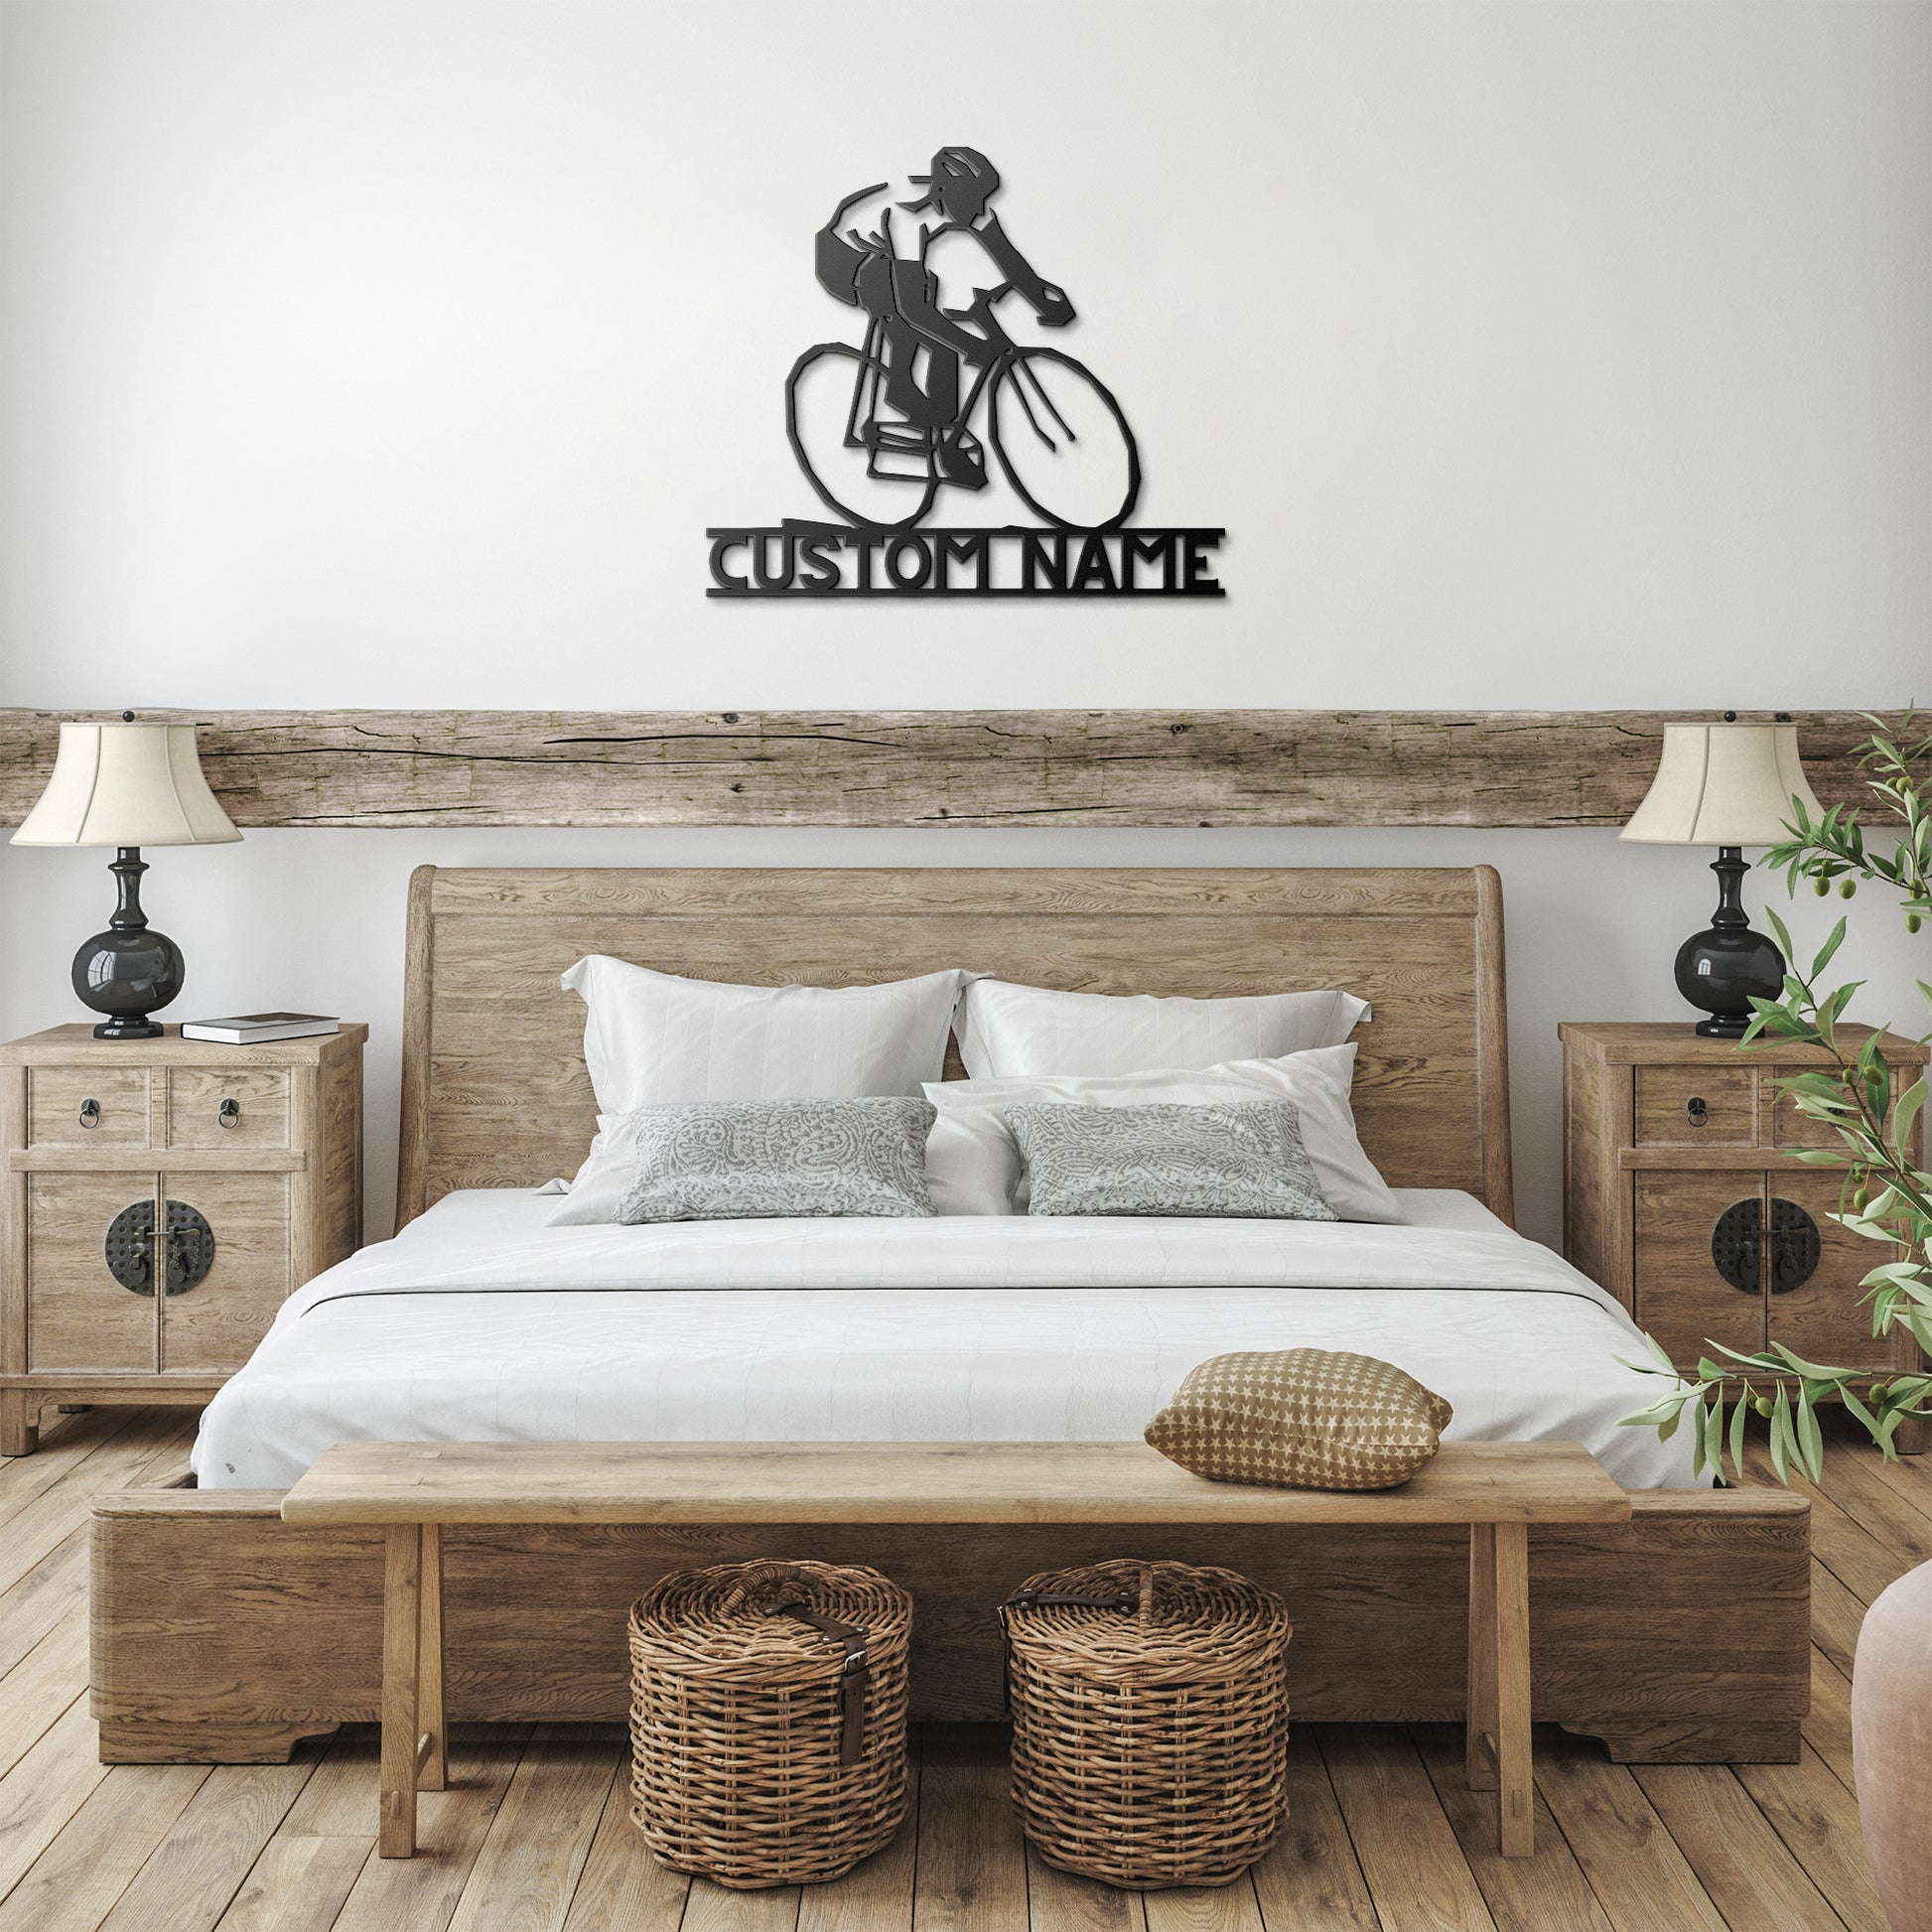 A bedroom with a teelaunch Personalized Gift For Cyclist - Cycling Metal Wall Art Sign of a bicycle on the wall.